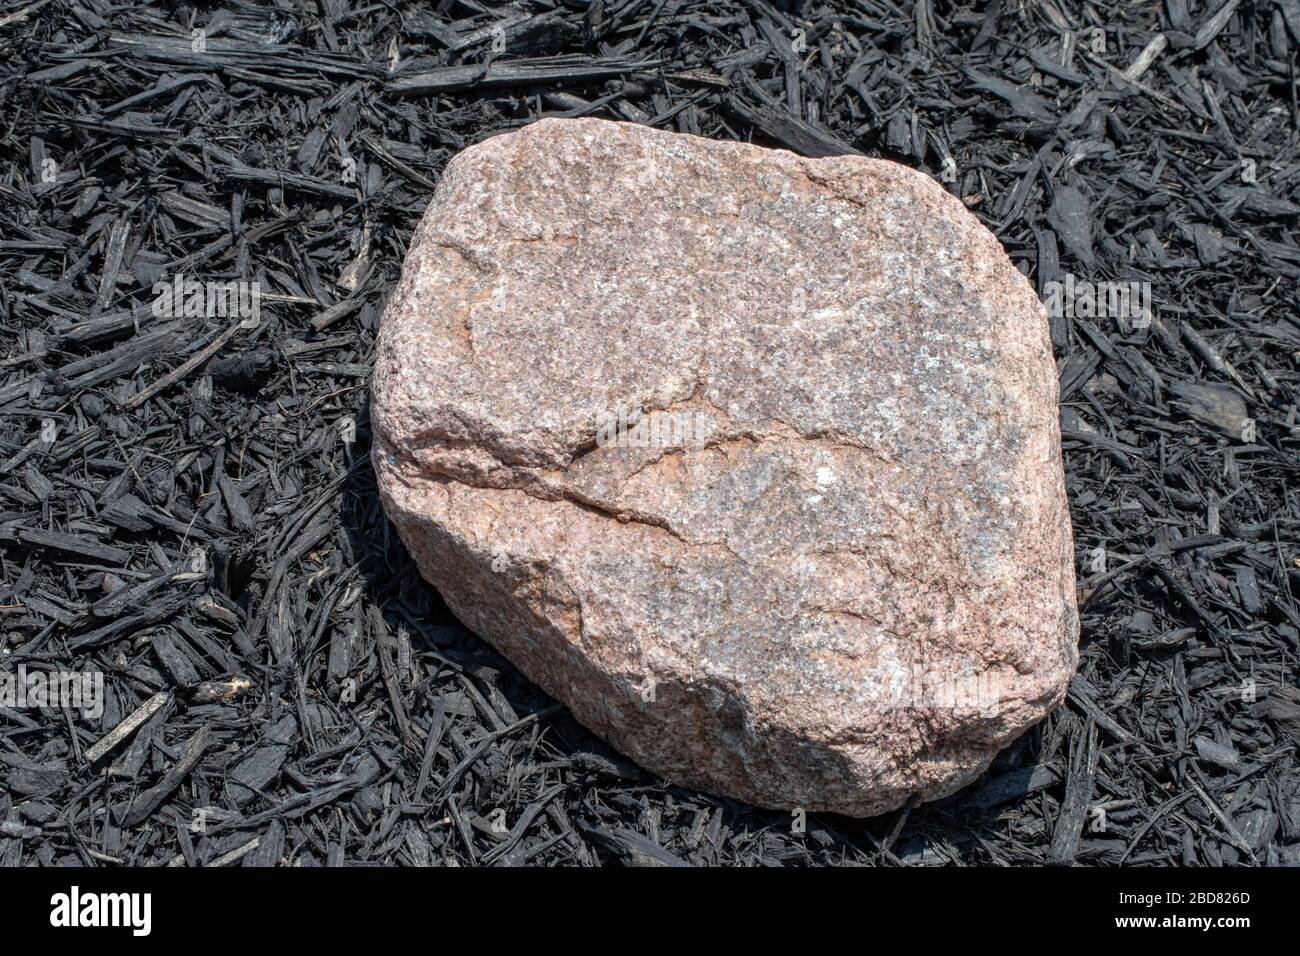 A large flat rock fills space in the garden surrounded by black mulch in Missouri. Bokeh effect. Stock Photo